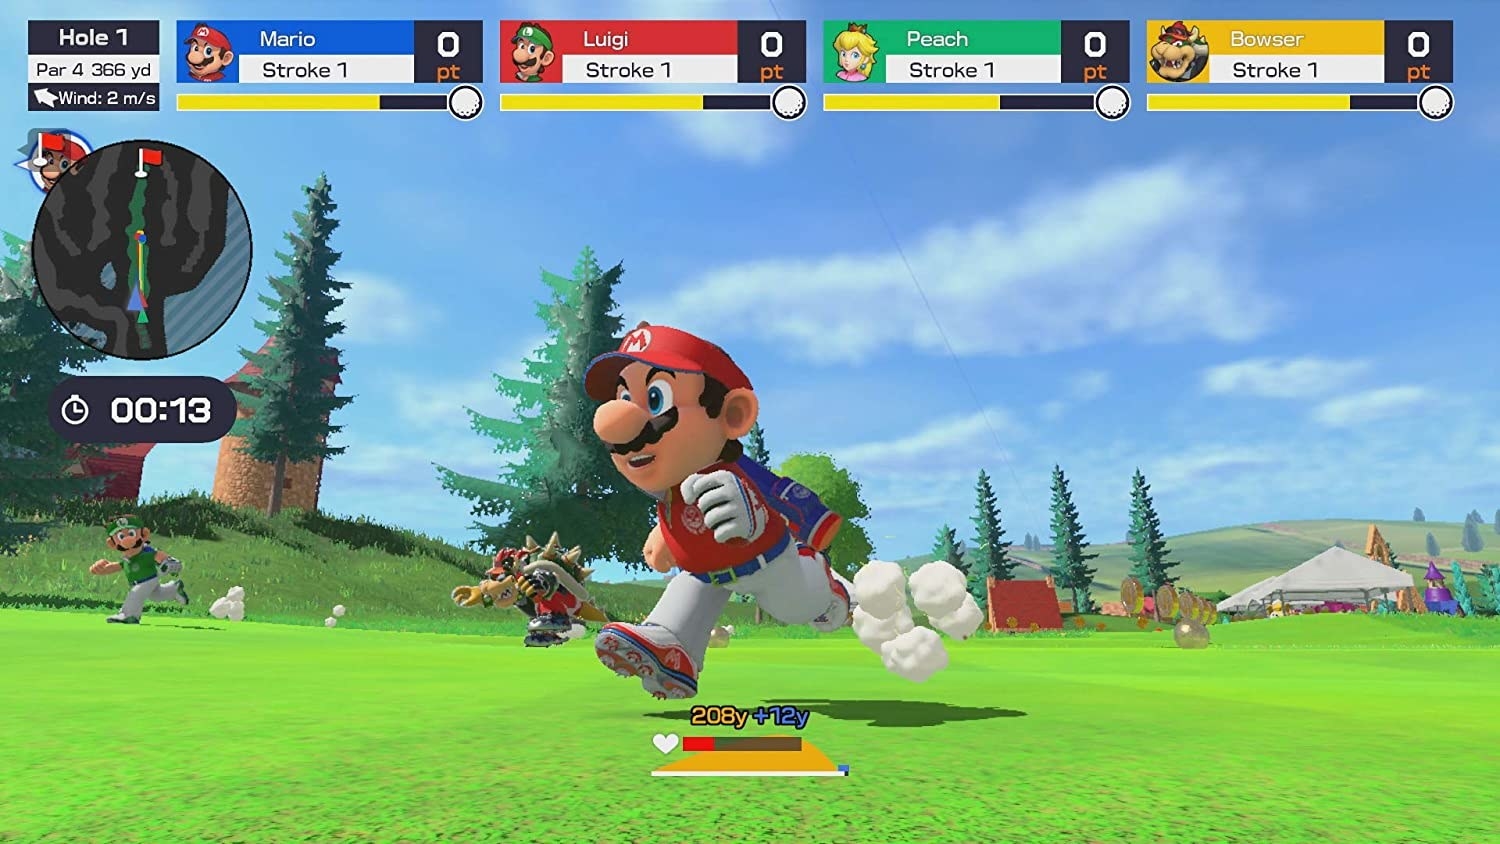 Mario and company race down the fairway of a golf course